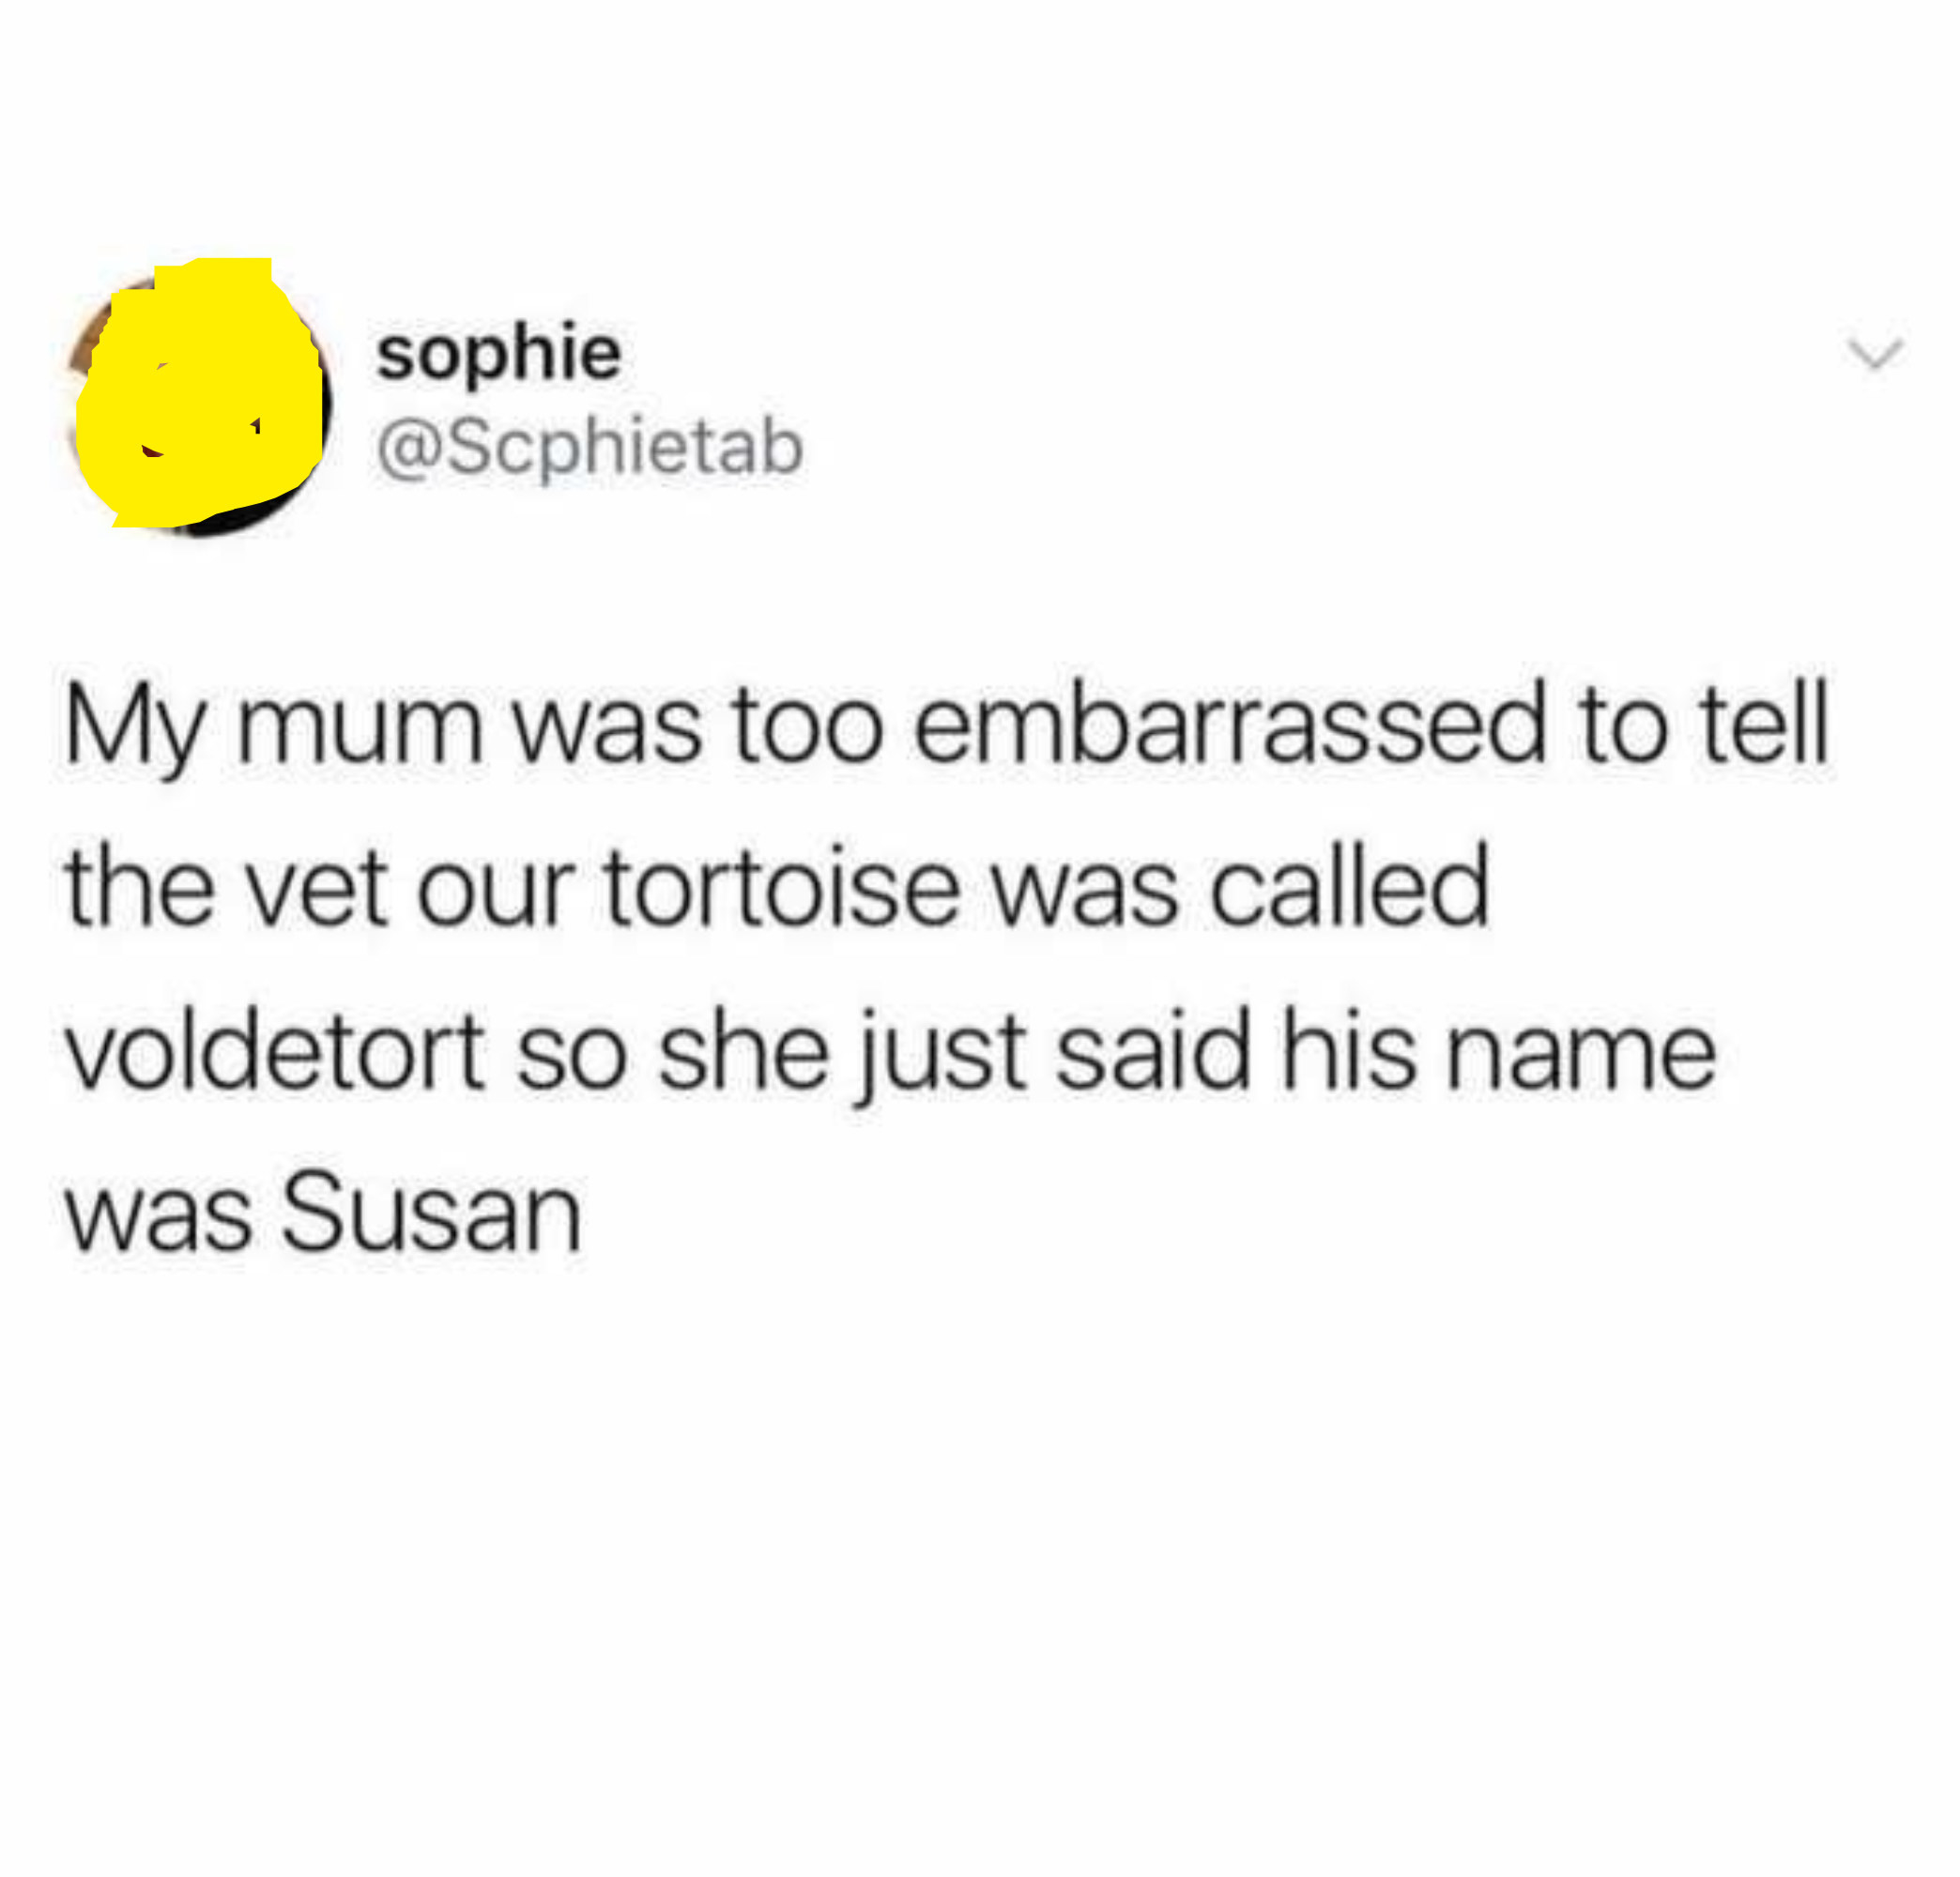 tweet reading my mum was too embarassed to tell the vet our tortoise was called voldetort so she just said his name was susan